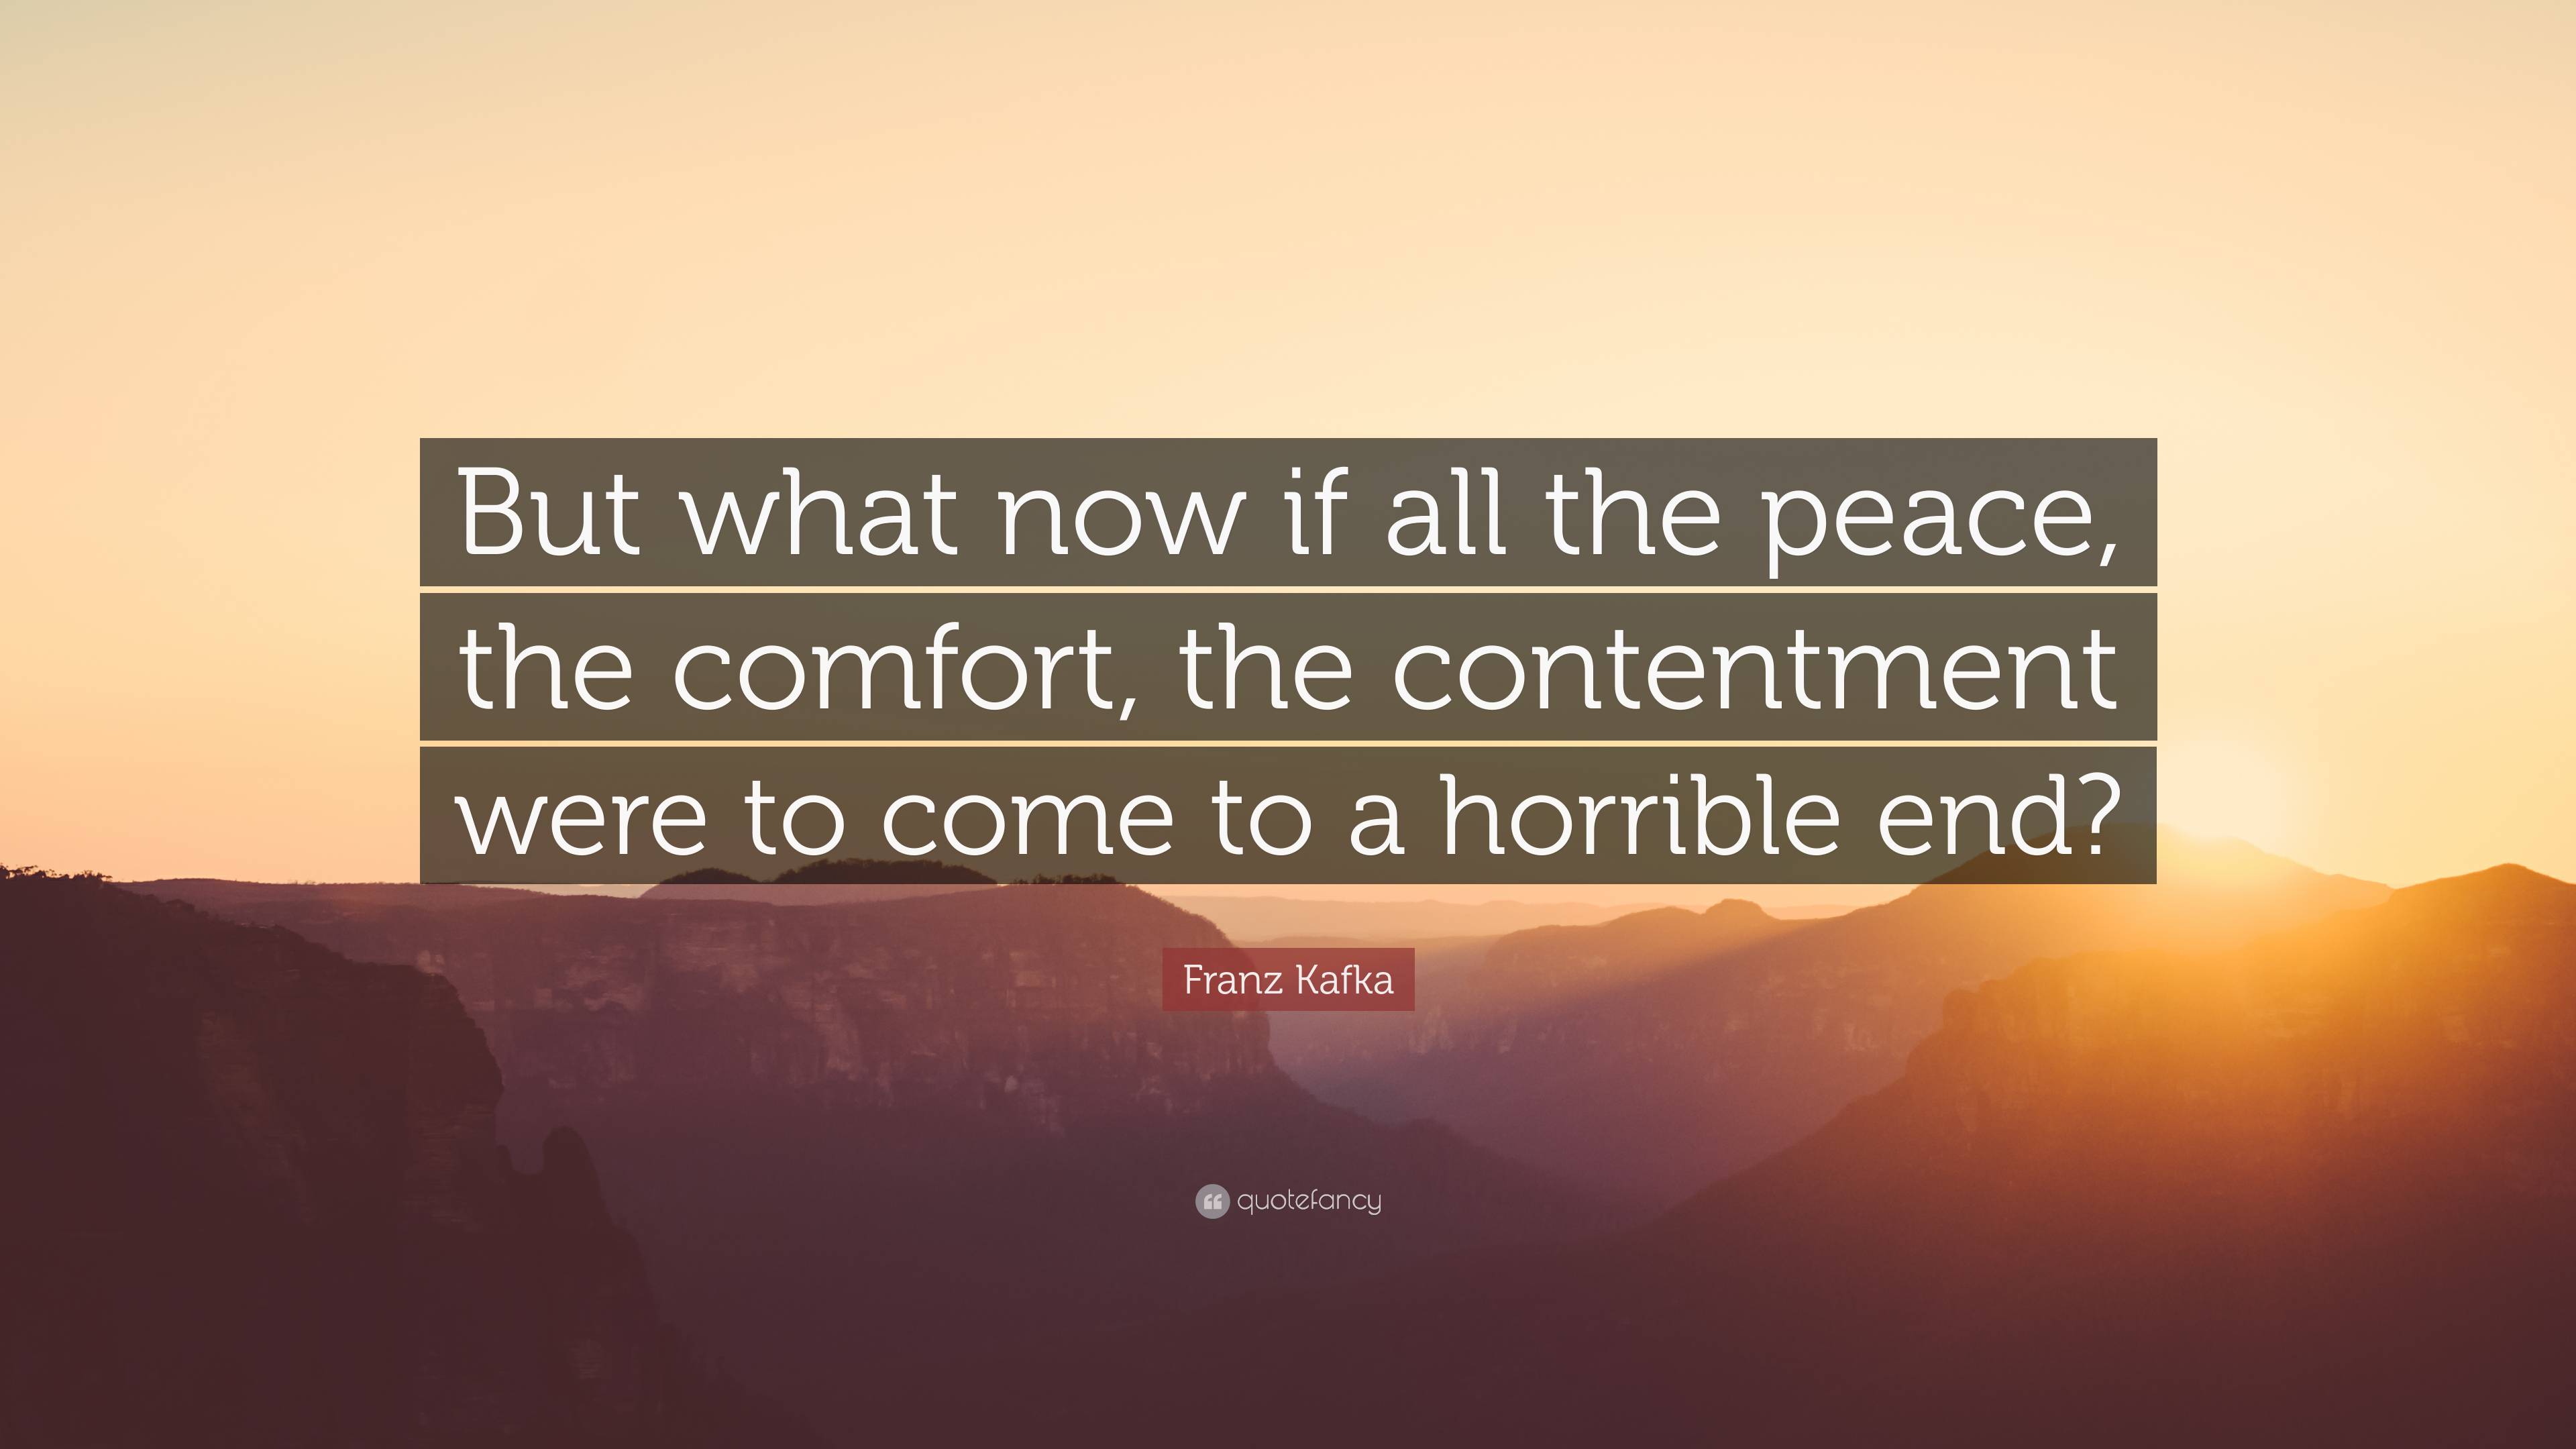 Franz Kafka Quote: “But what now if all the peace, the comfort, the contentment were to come to a horrible end?” (2 wallpaper)